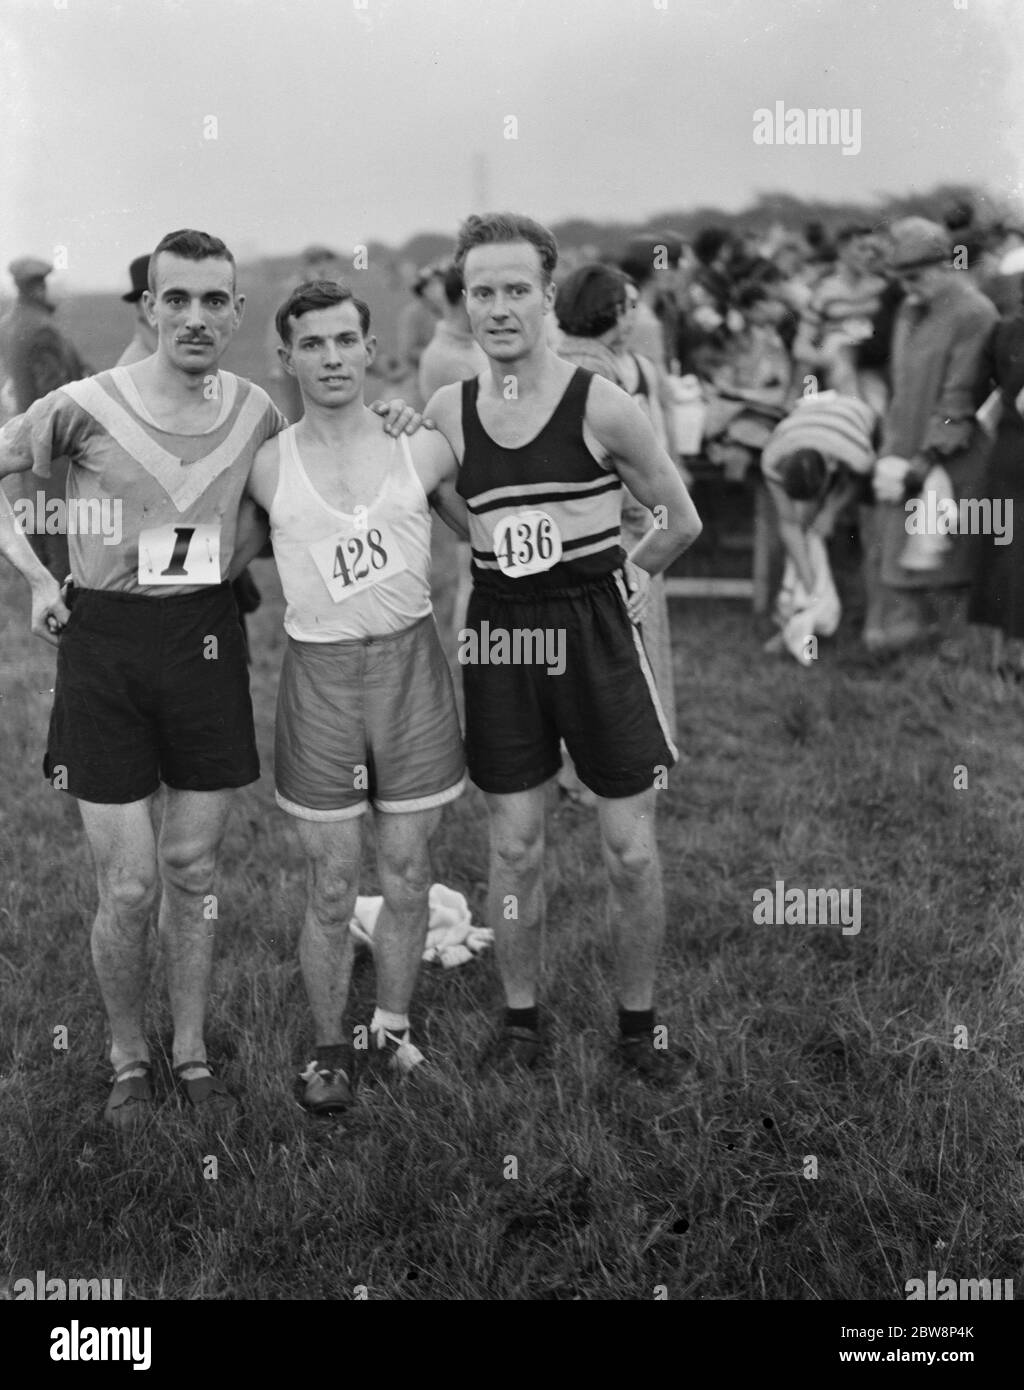 Athletes compete in the Southern Thames cross country race ; They are H H Isted ( No 428 ) , S H Shirley ( No 1 ) R G Gosney ( No 436 ) 1937 . Stock Photo